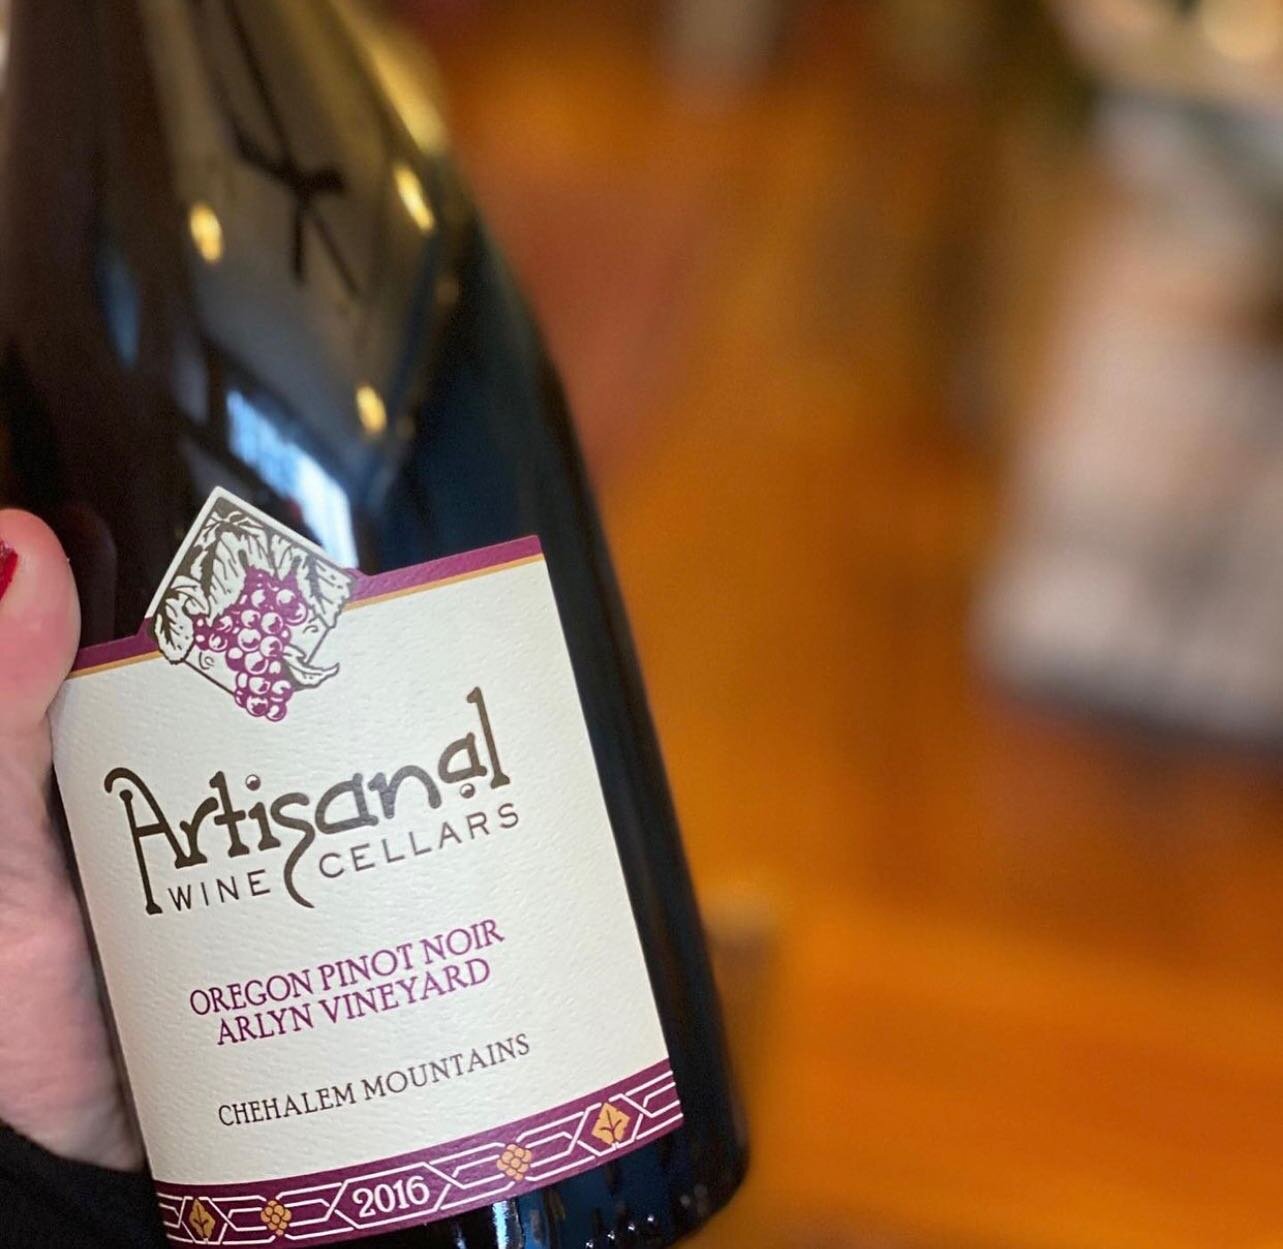 Which 𝒜𝓇𝓉𝒾𝓈𝒶𝓃𝒶𝓁 wine do you plan on sipping on today?

Taste.This.Place.
&bull; &bull; &bull;
#Saturday #WeekendVibes #SaturdaySips #Cheers #WineTasting #Wine #Vino #PinotNoir #WineIsMyHappyPlace #OregonWine #DrinkOregon #OregonWinePress #Wi